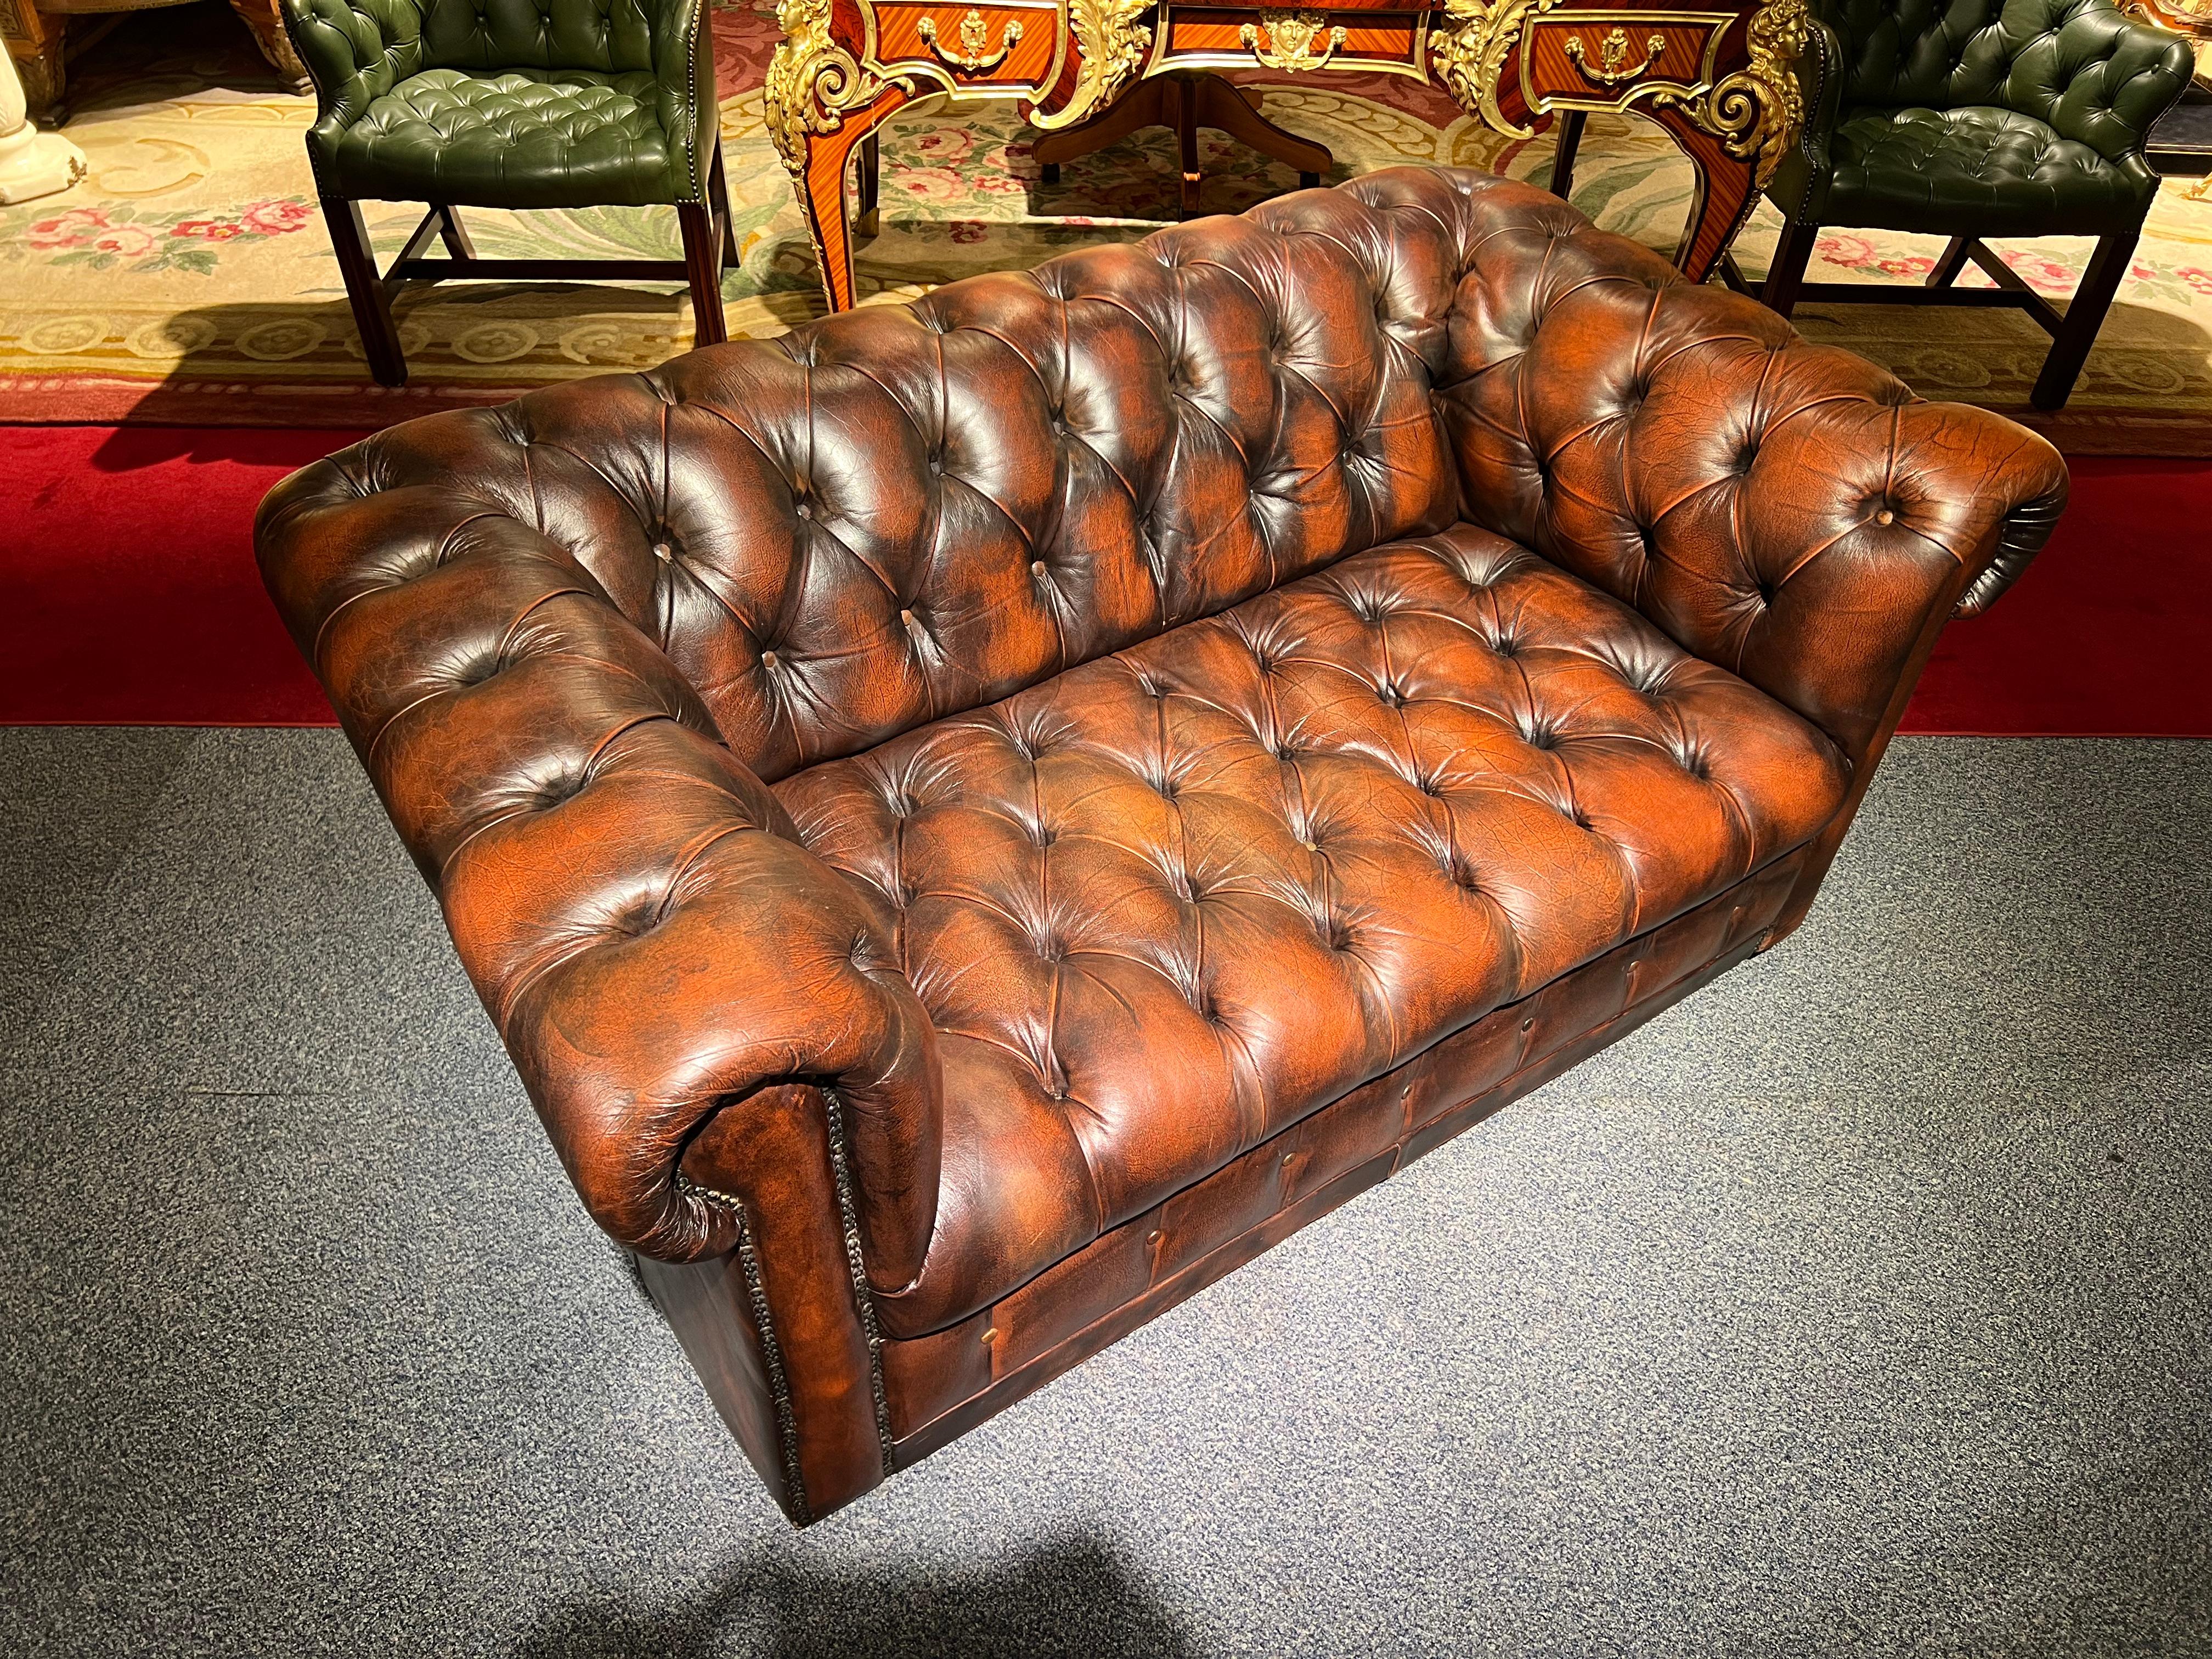 20th Century Stunning Vintage English Brown Leather Chesterfield Sofa fully tufted